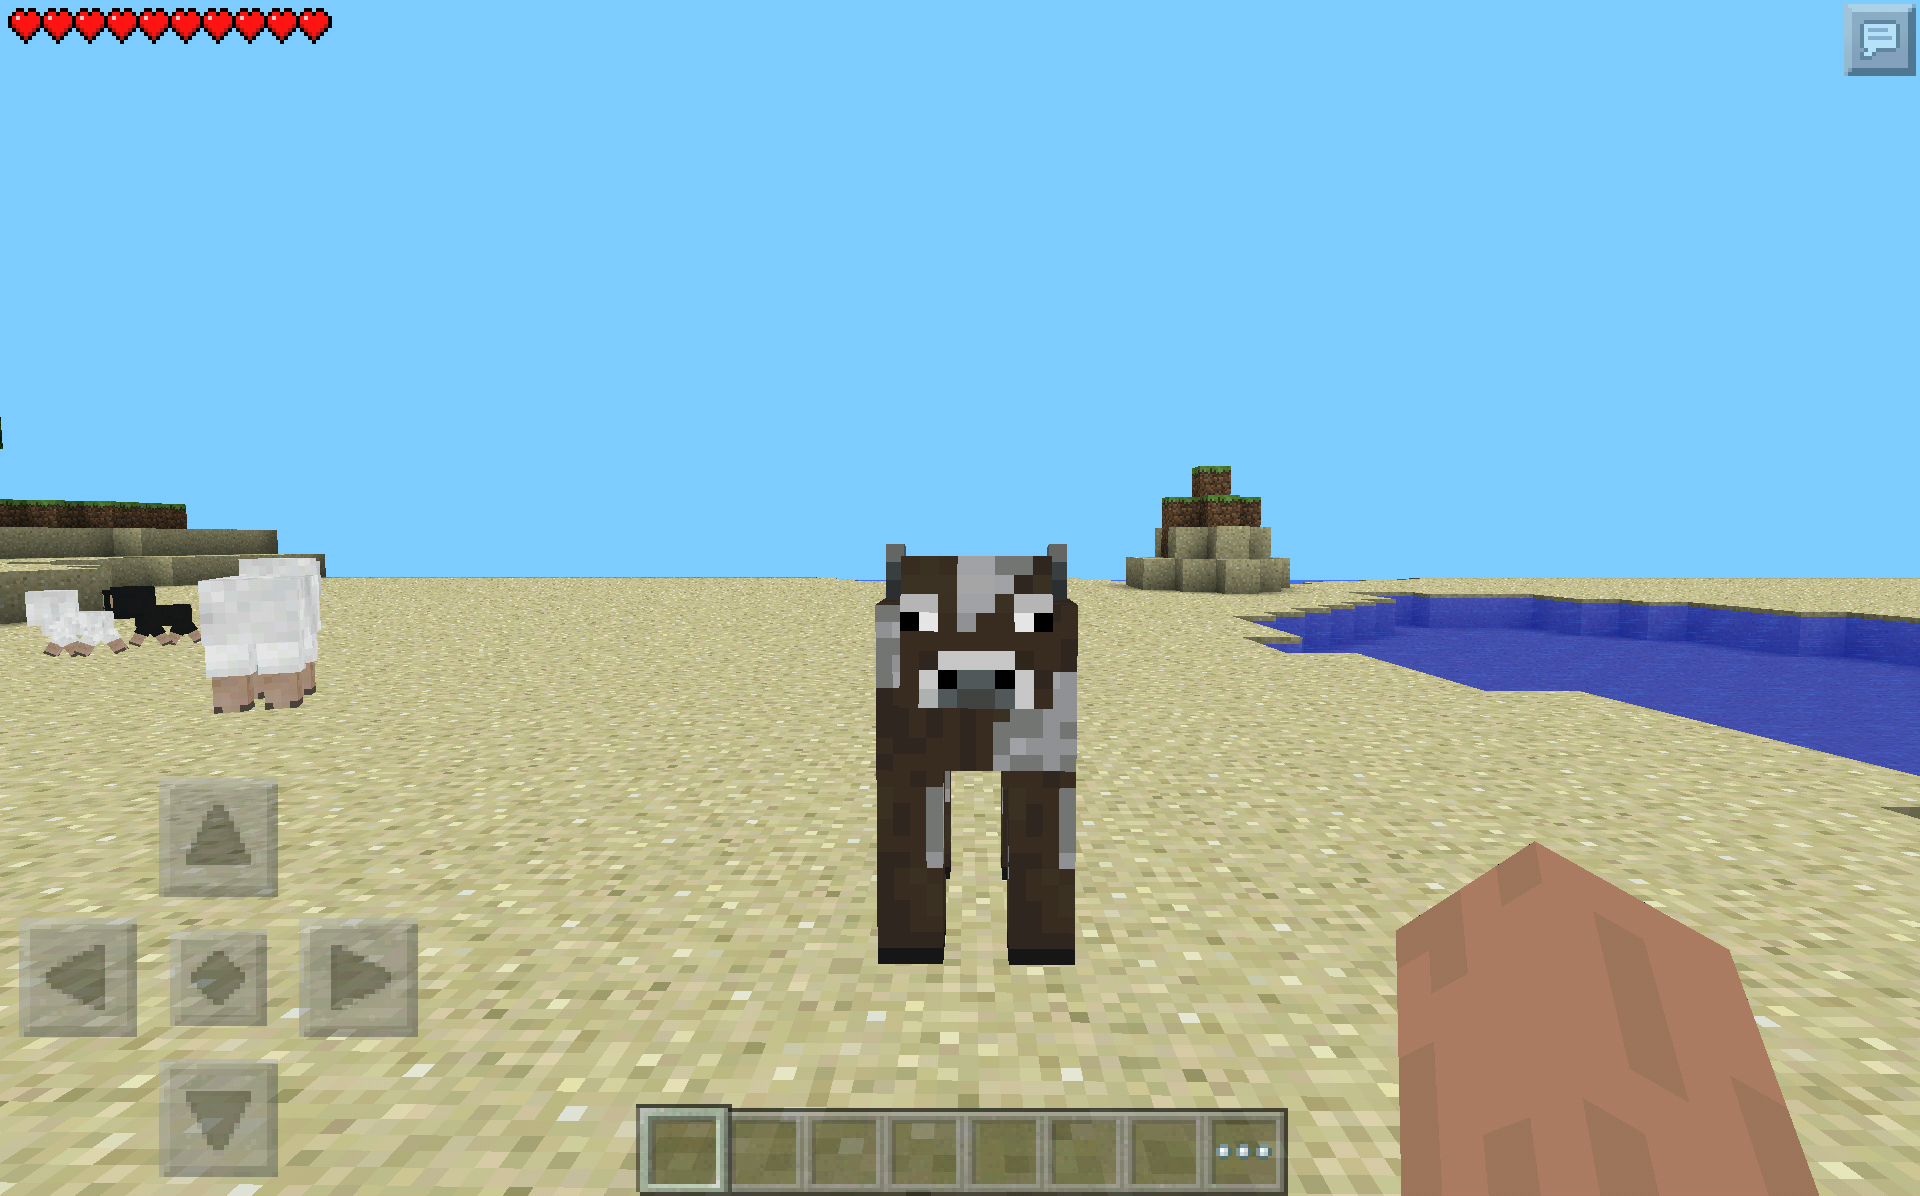 What is the title of this picture ? Cow/Gallery | Minecraft Wiki | FANDOM powered by Wikia